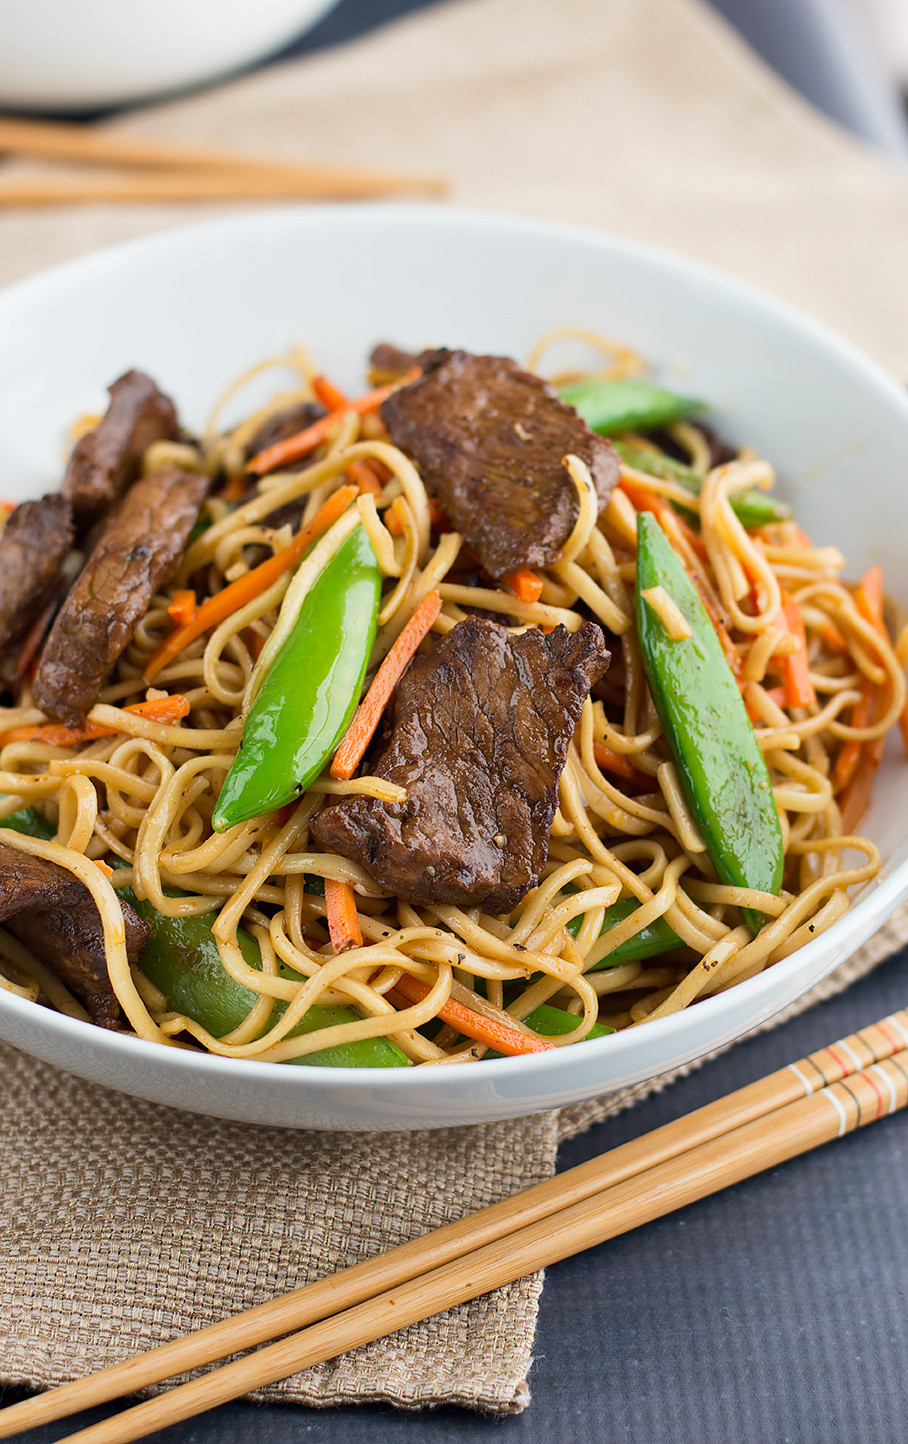 Asian Noodles Stir Fry
 Red Thai Curry Stir Fried Chinese Noodles with Beef